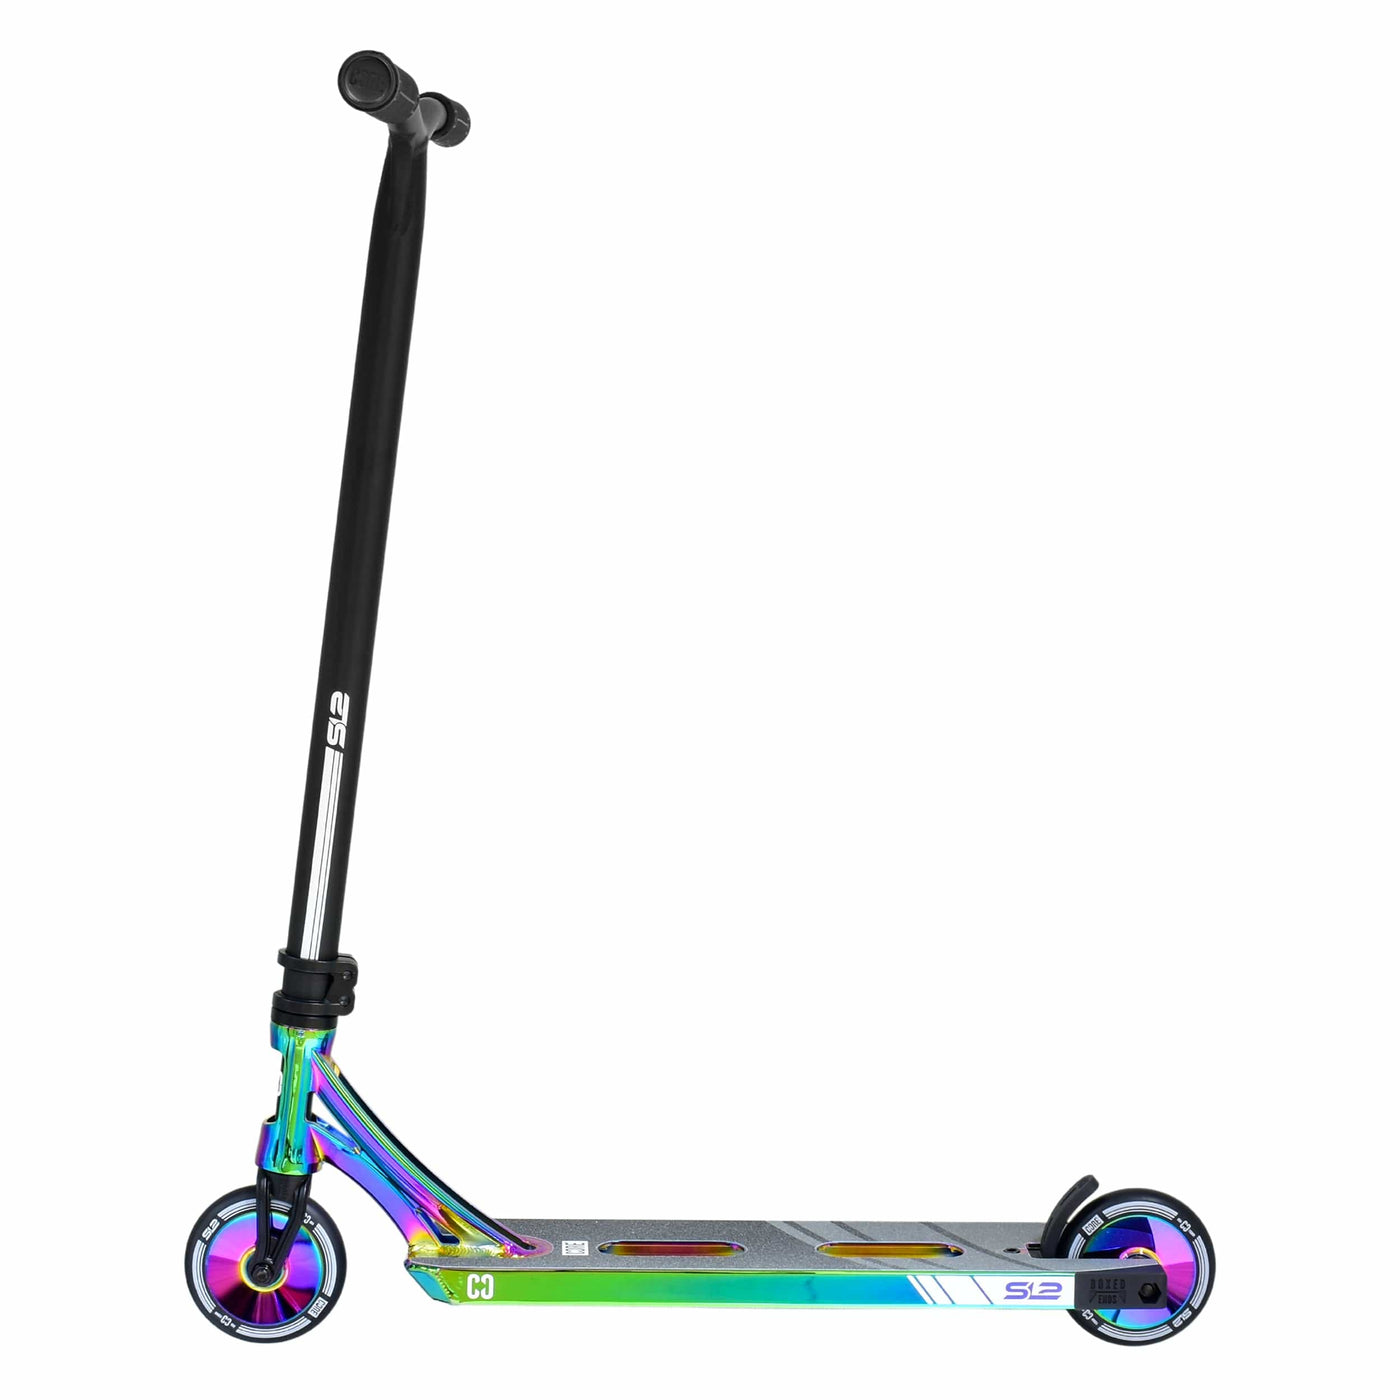 CORE SL2 Stunt Scooter Neo Black I Adult Stunt Scooter Side